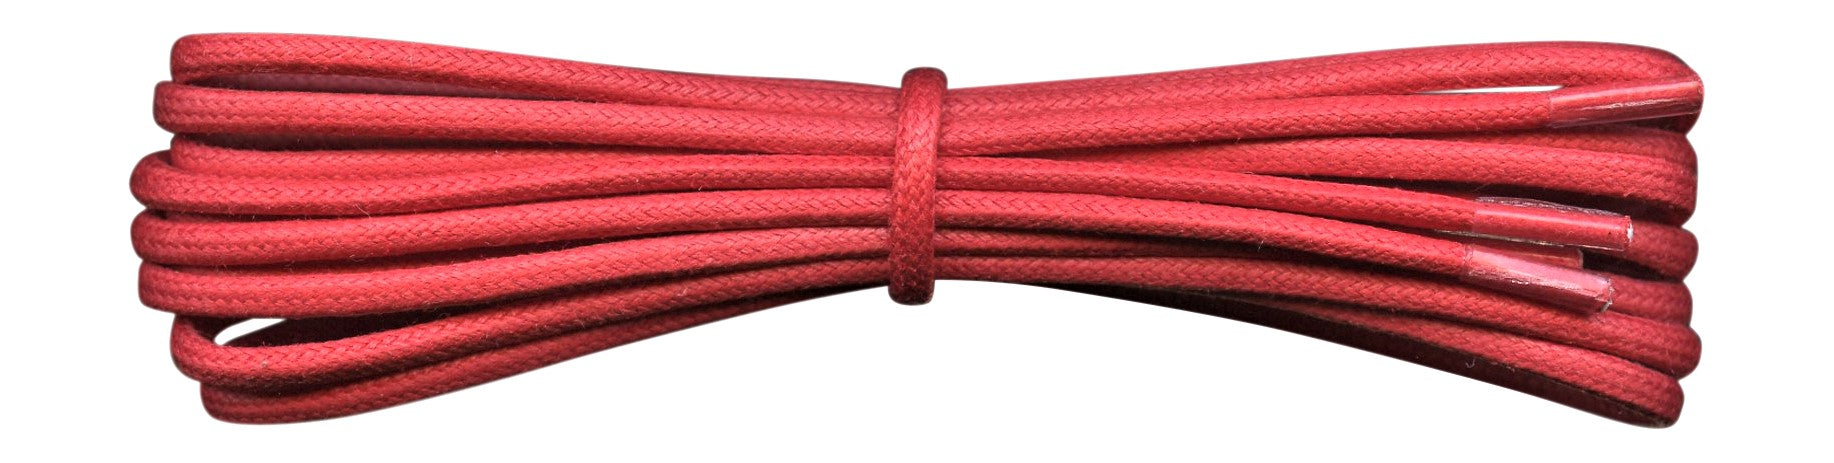 Fabmania red 2 mm round waxed cotton shoe laces